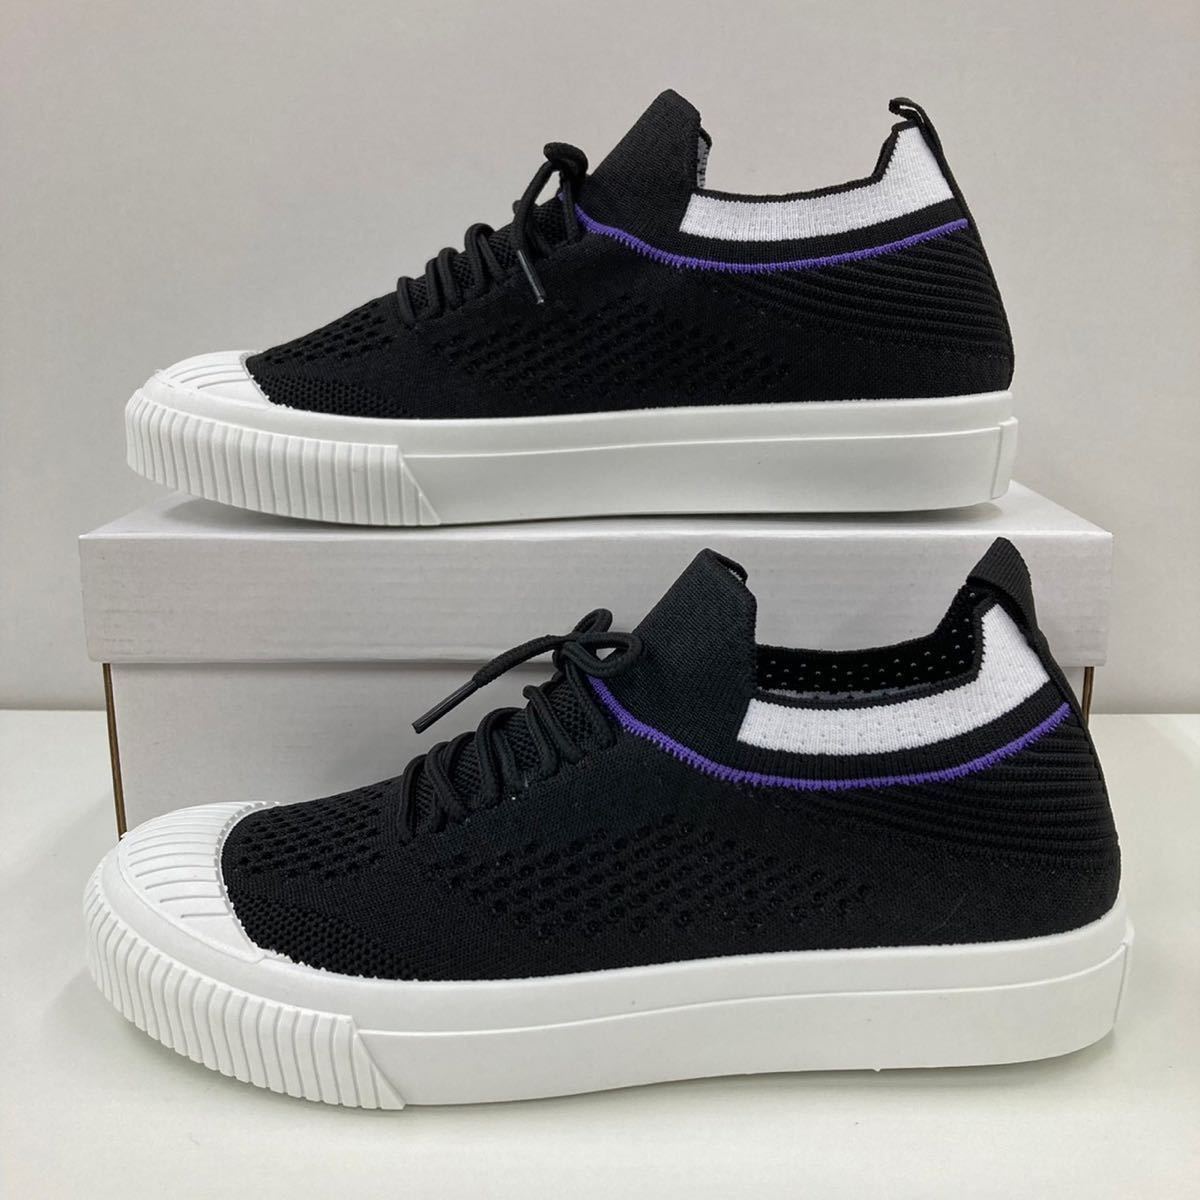  new goods lady's 23.0cm light weight wide width mesh sneakers slip prevention processing attaching sport sneakers slip-on shoes shoes black black color taby3712